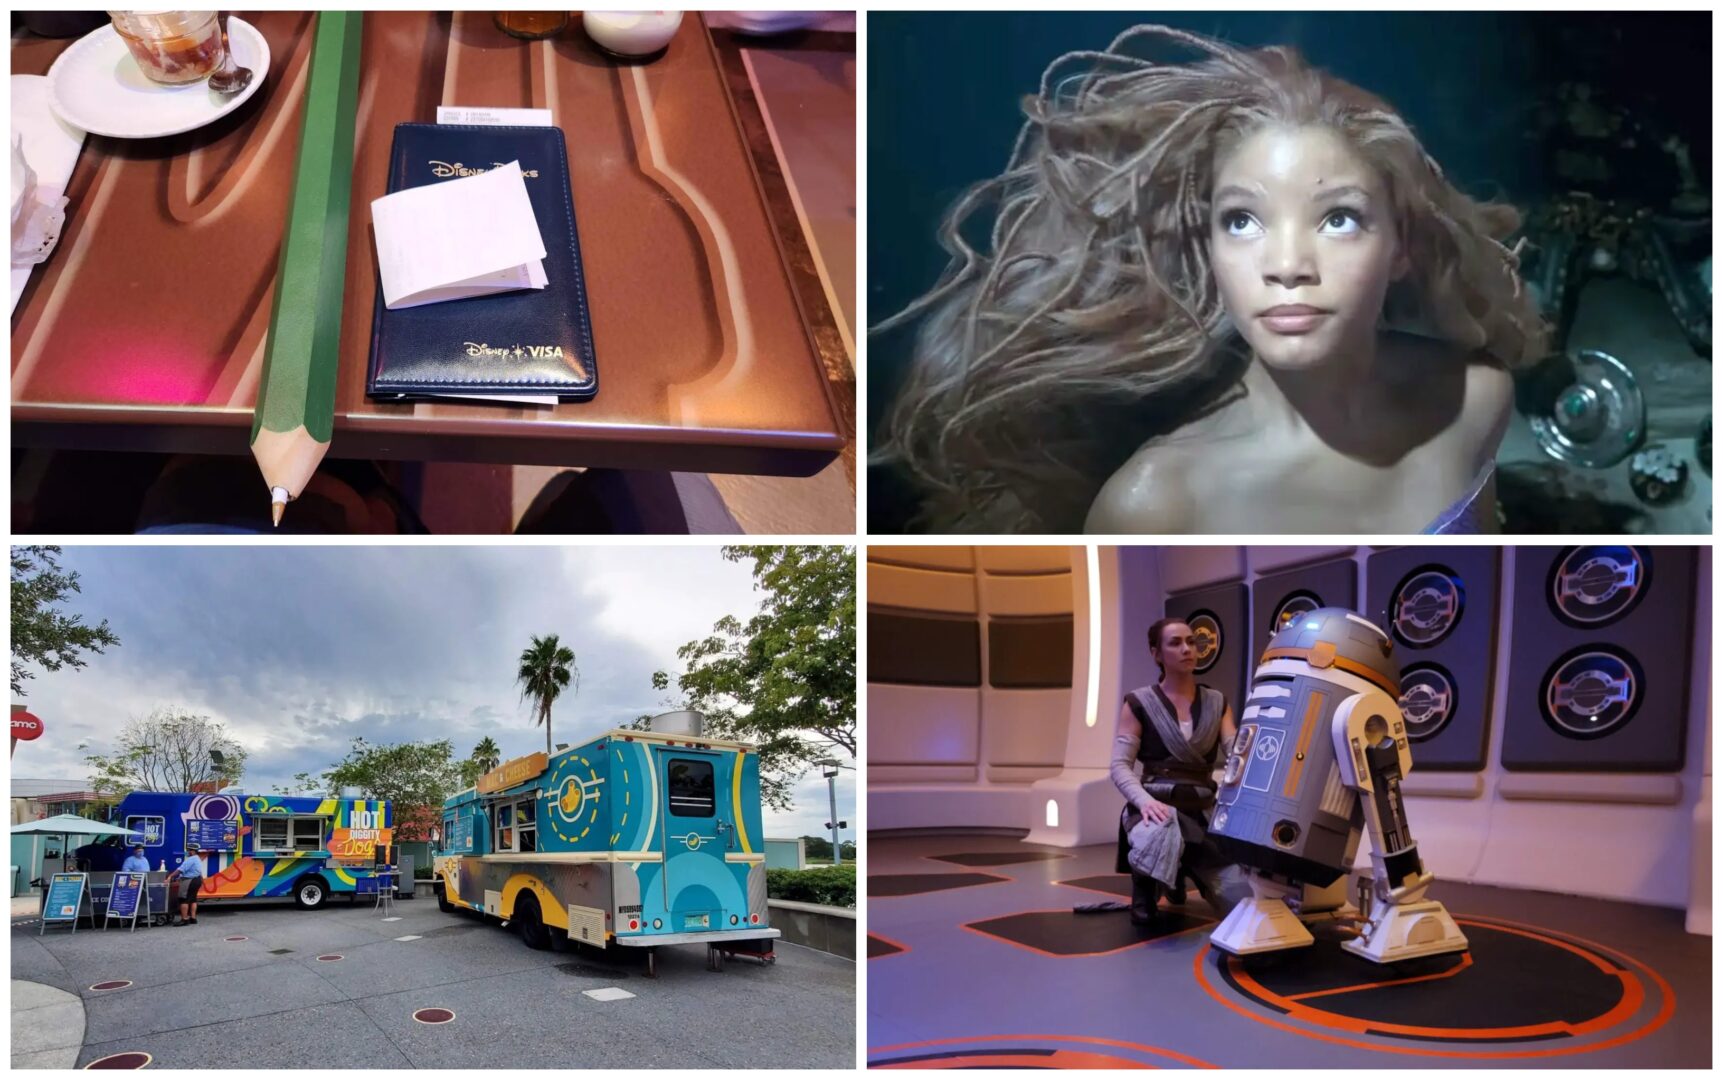 Disney News Highlights: Roundup Rodeo Removes “Big Pencil” Gag, More Park “Lands” Not More Parks According to Josh D’Amaro, Disney World Operated Food Trucks Closing, New Cinderella Loungefly